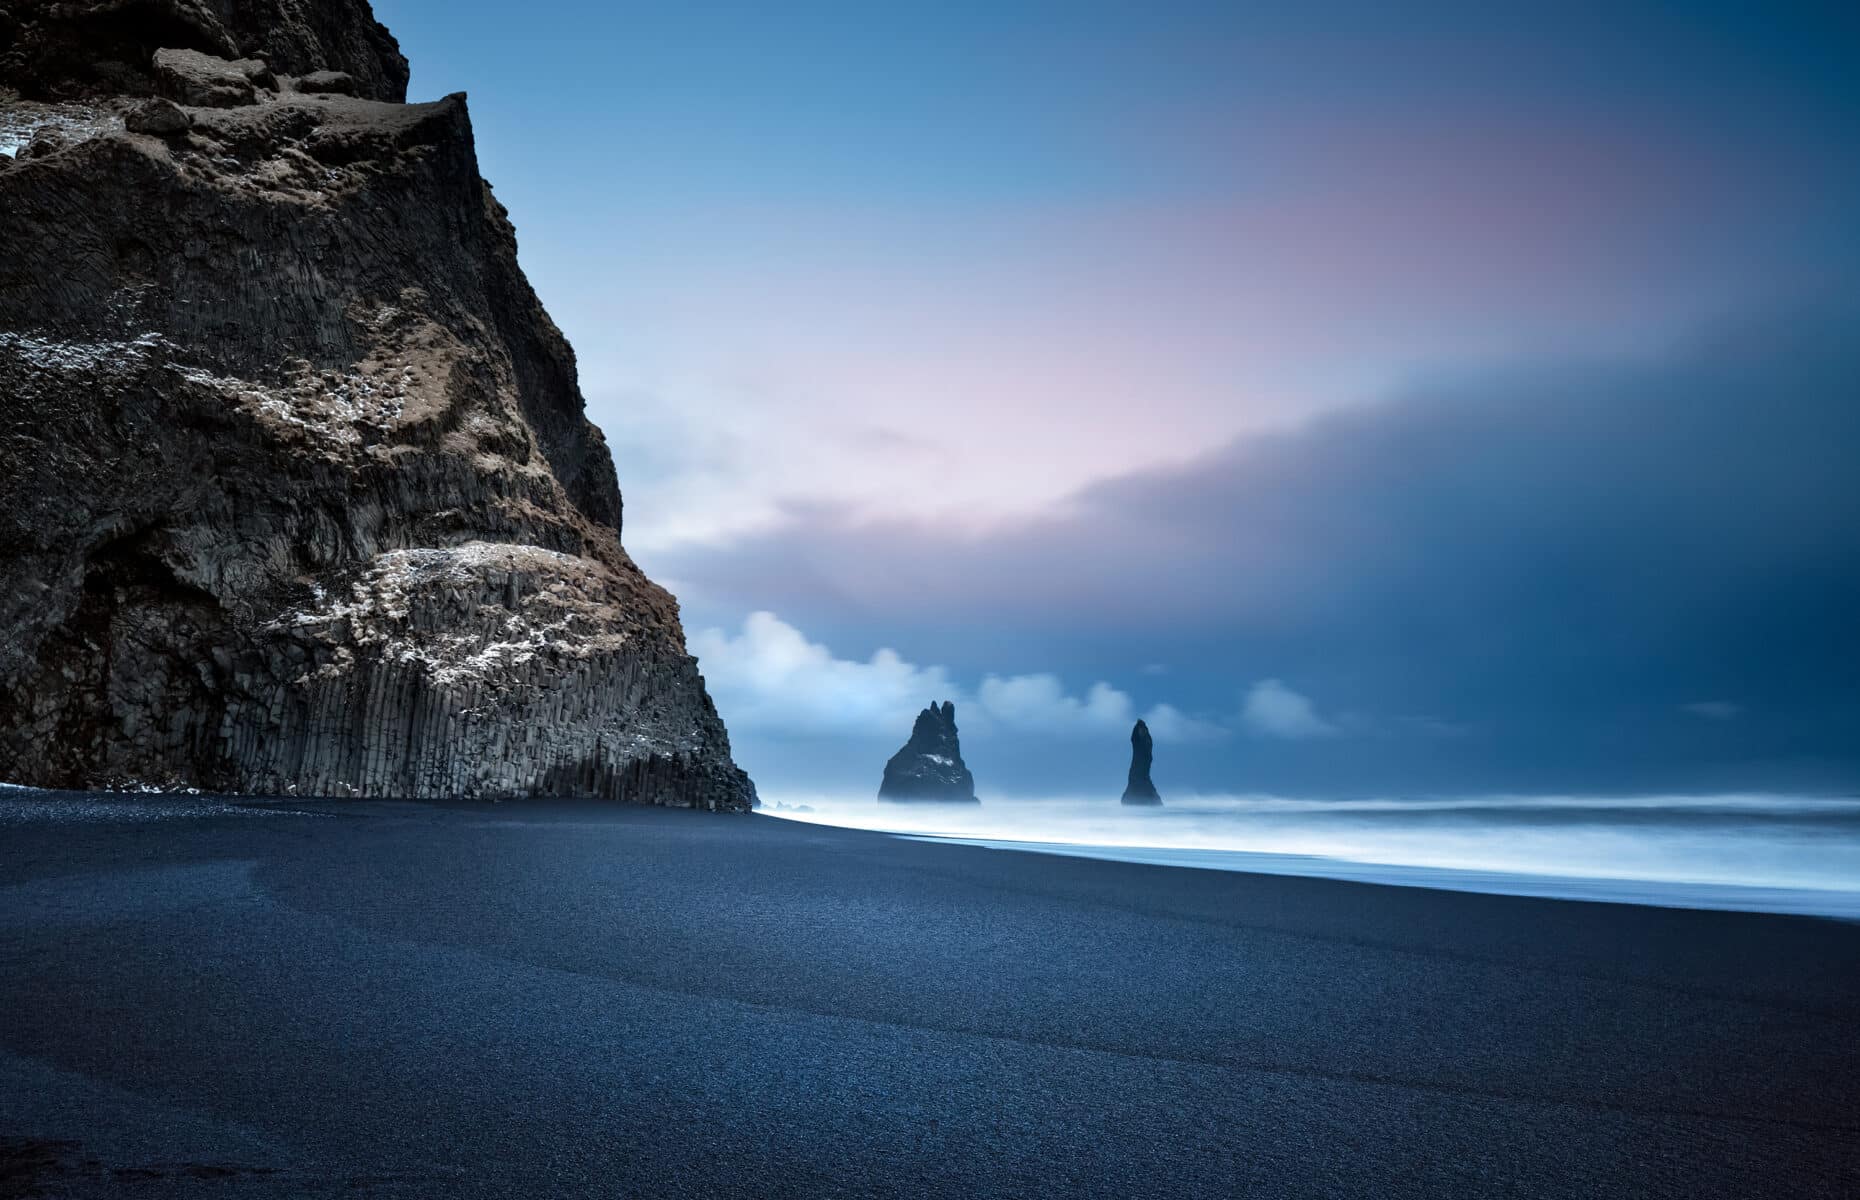 Beautiful Landscape of a Famous Black Pebbles Beach. Amazing View on the Basalt Cliffs in the Sea. Vik Myrdal. Iceland